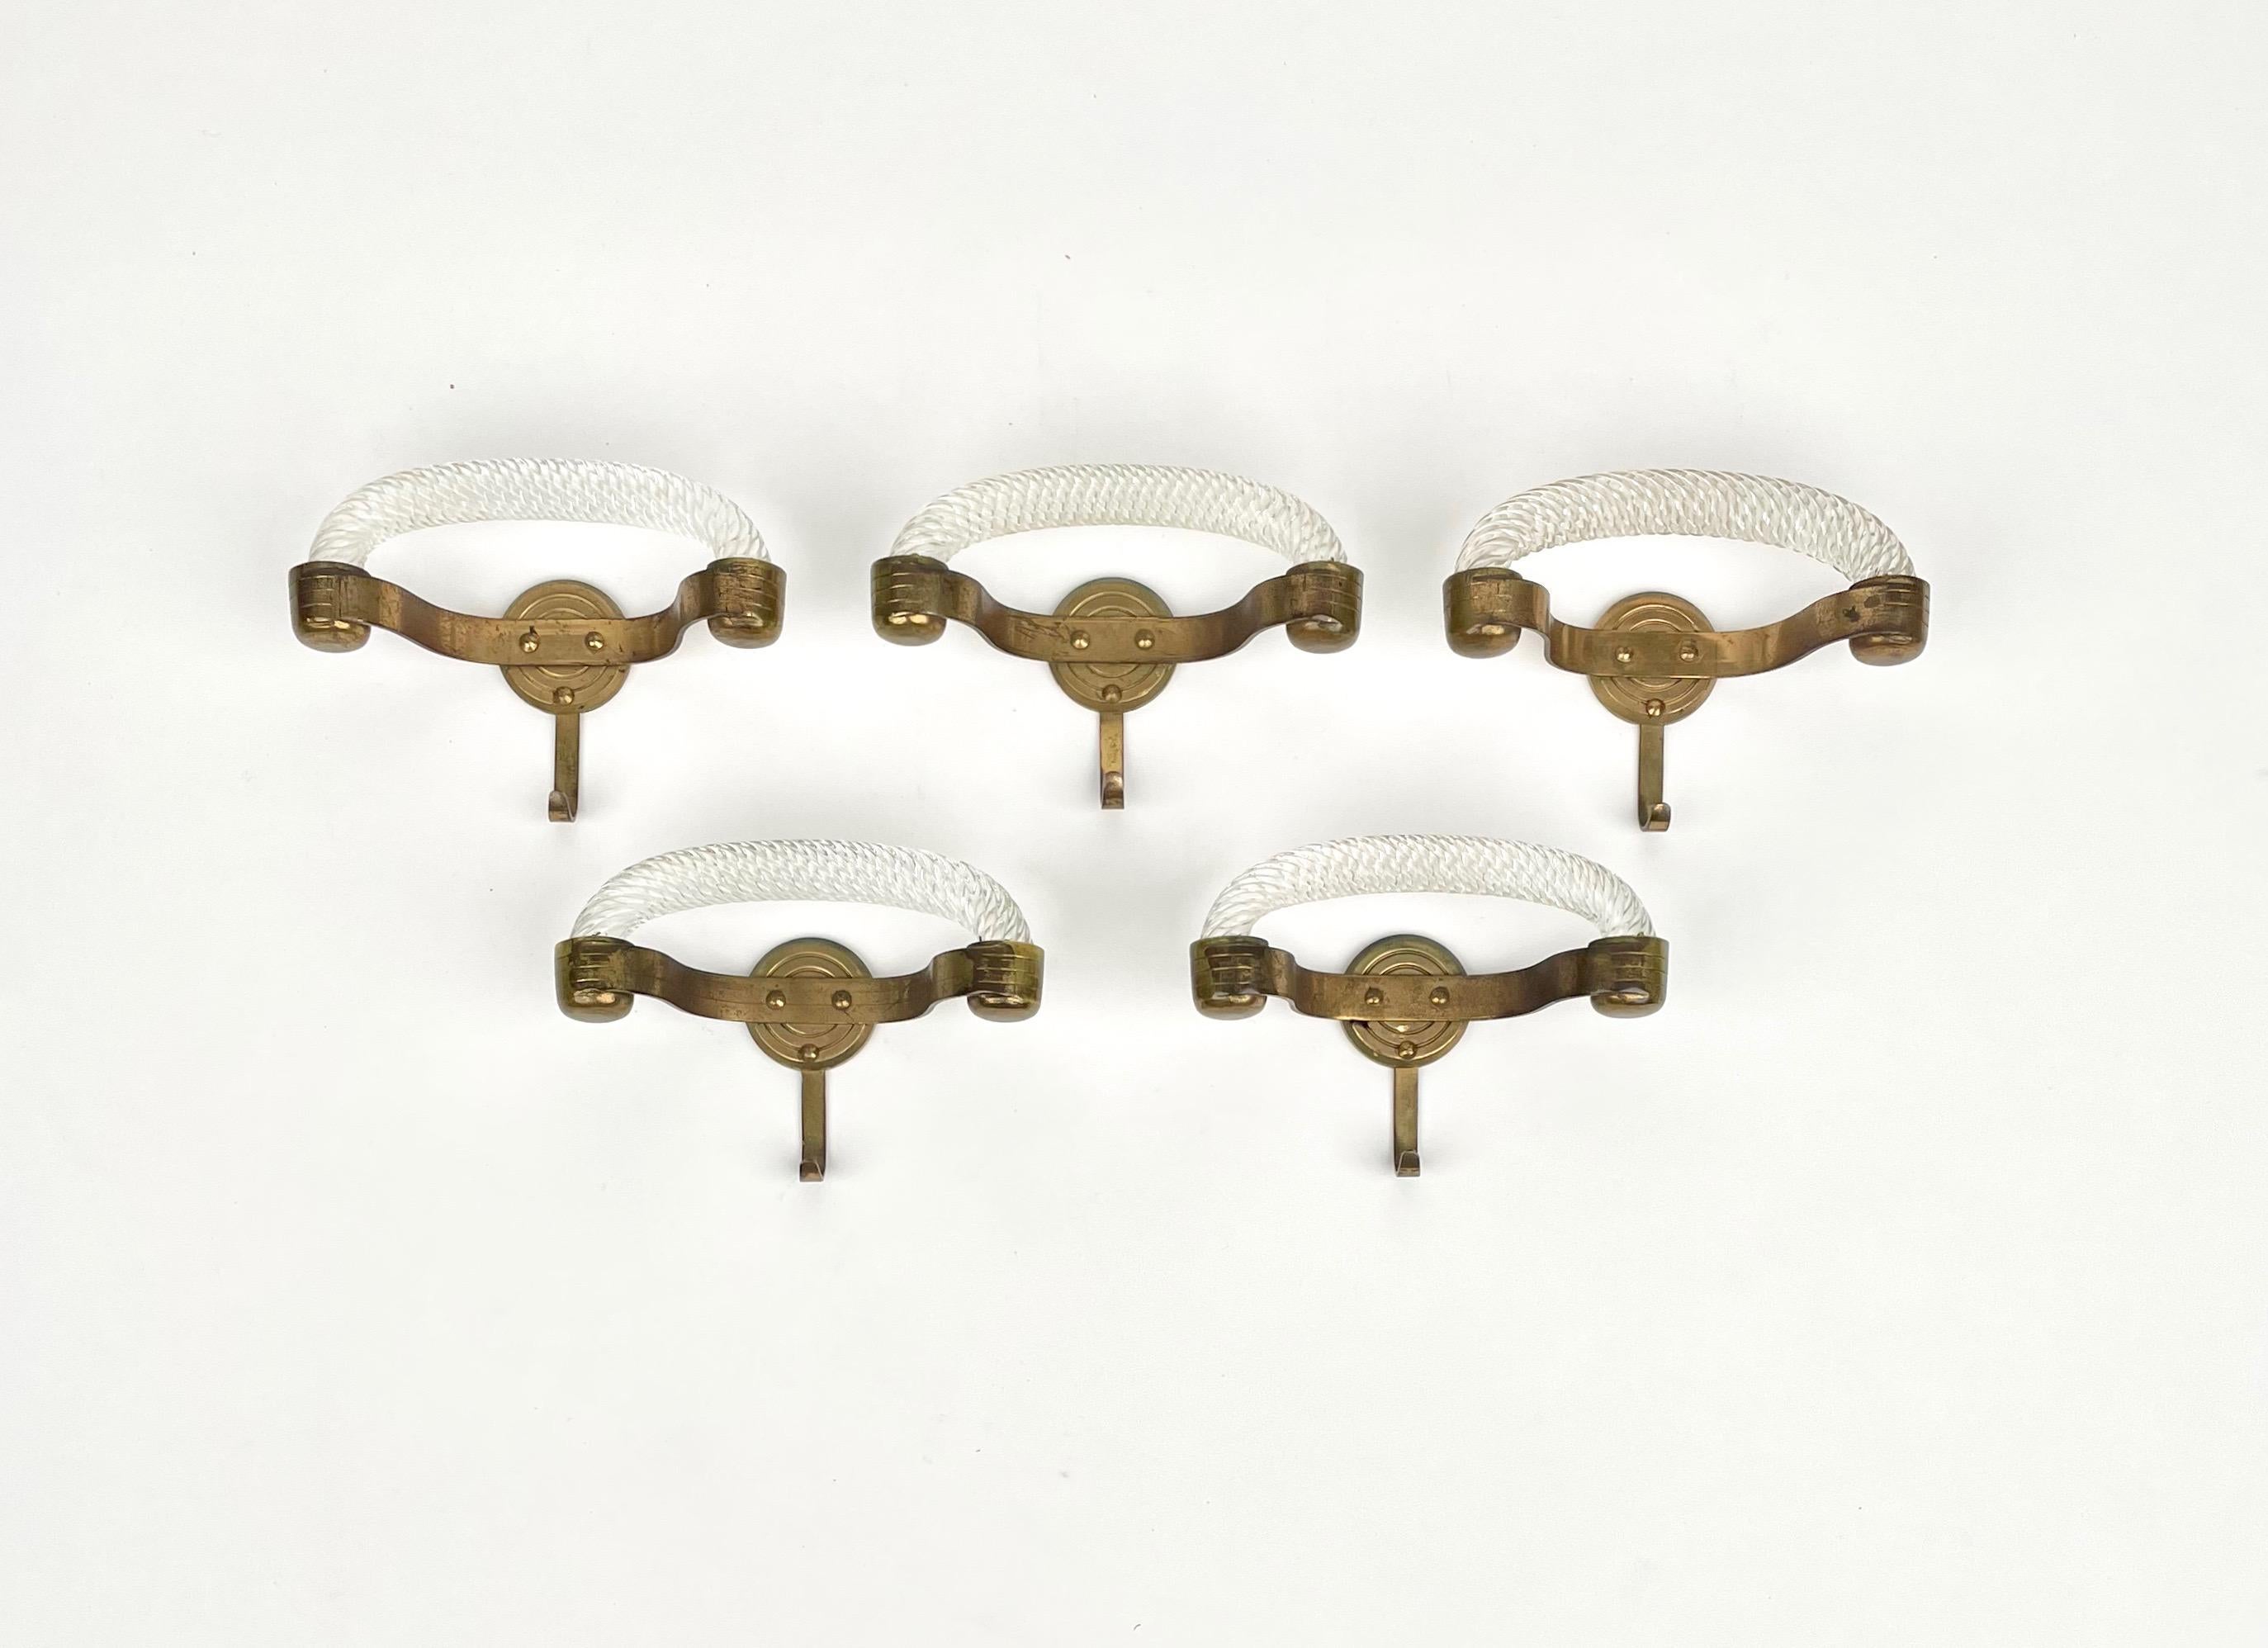 Set of five coat hangers in Murano glass with brass hooks by Venini. Produced in Italy in the 1940s.